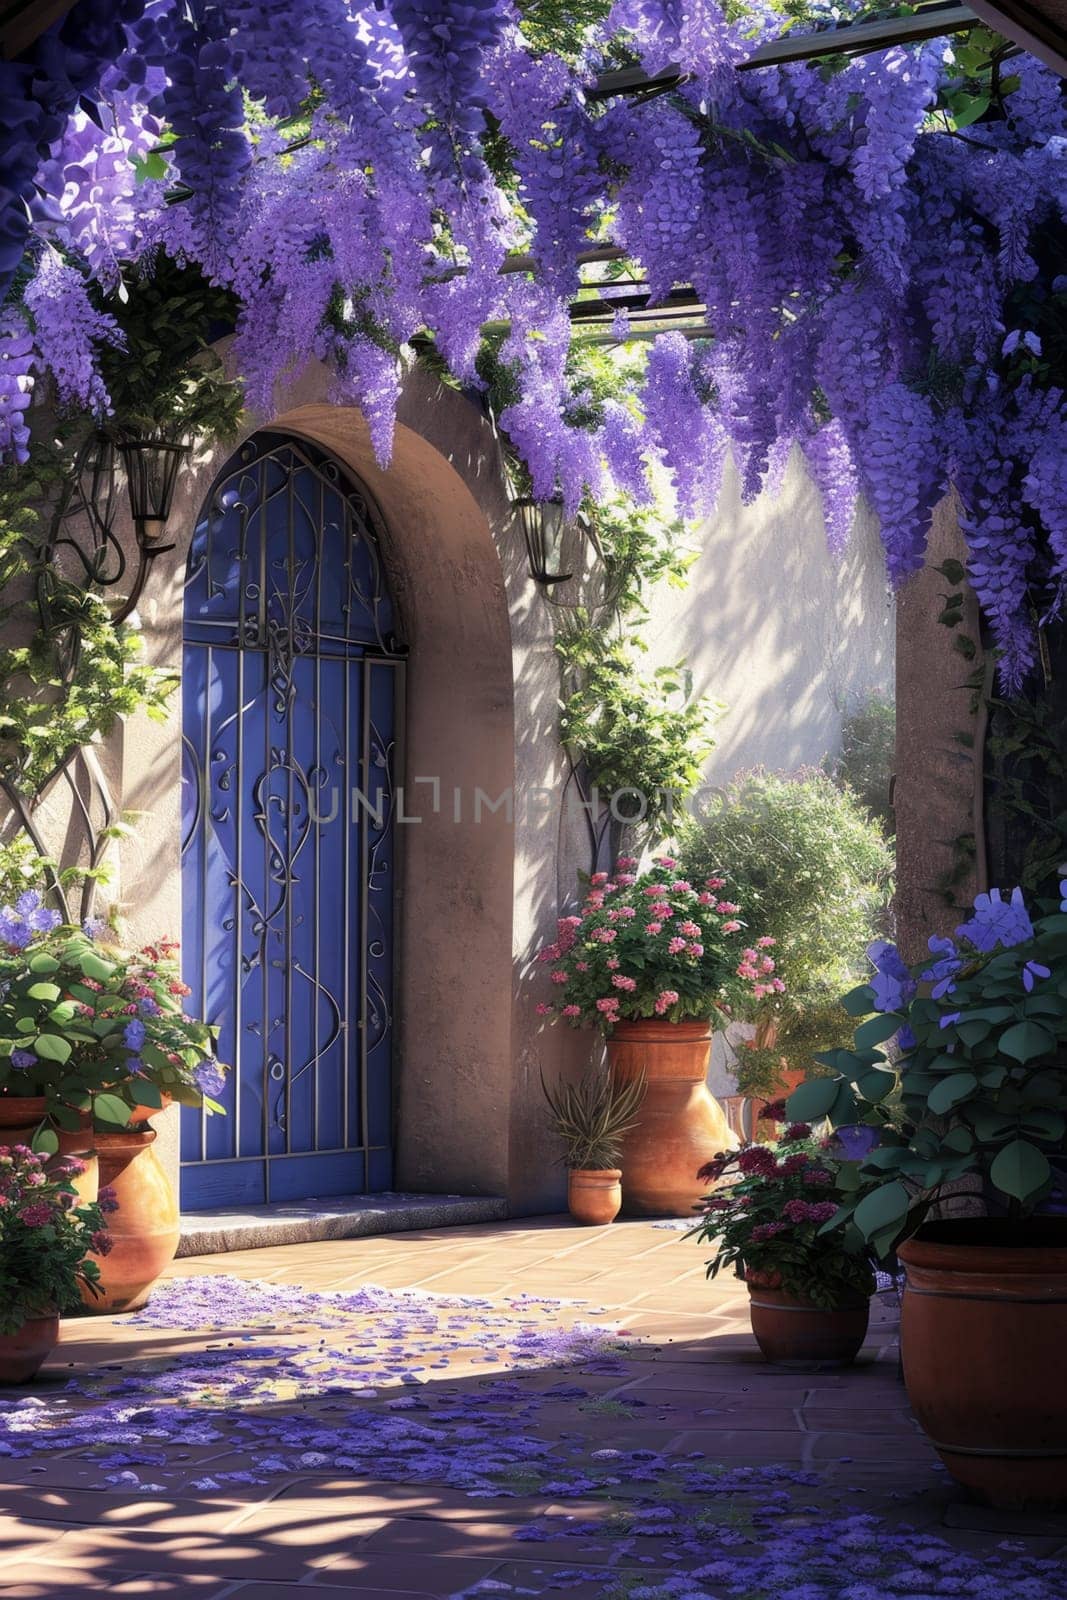 The Wisteria sinensis plant with lilac flowers decorates the entrance to the house. 3d illustration.